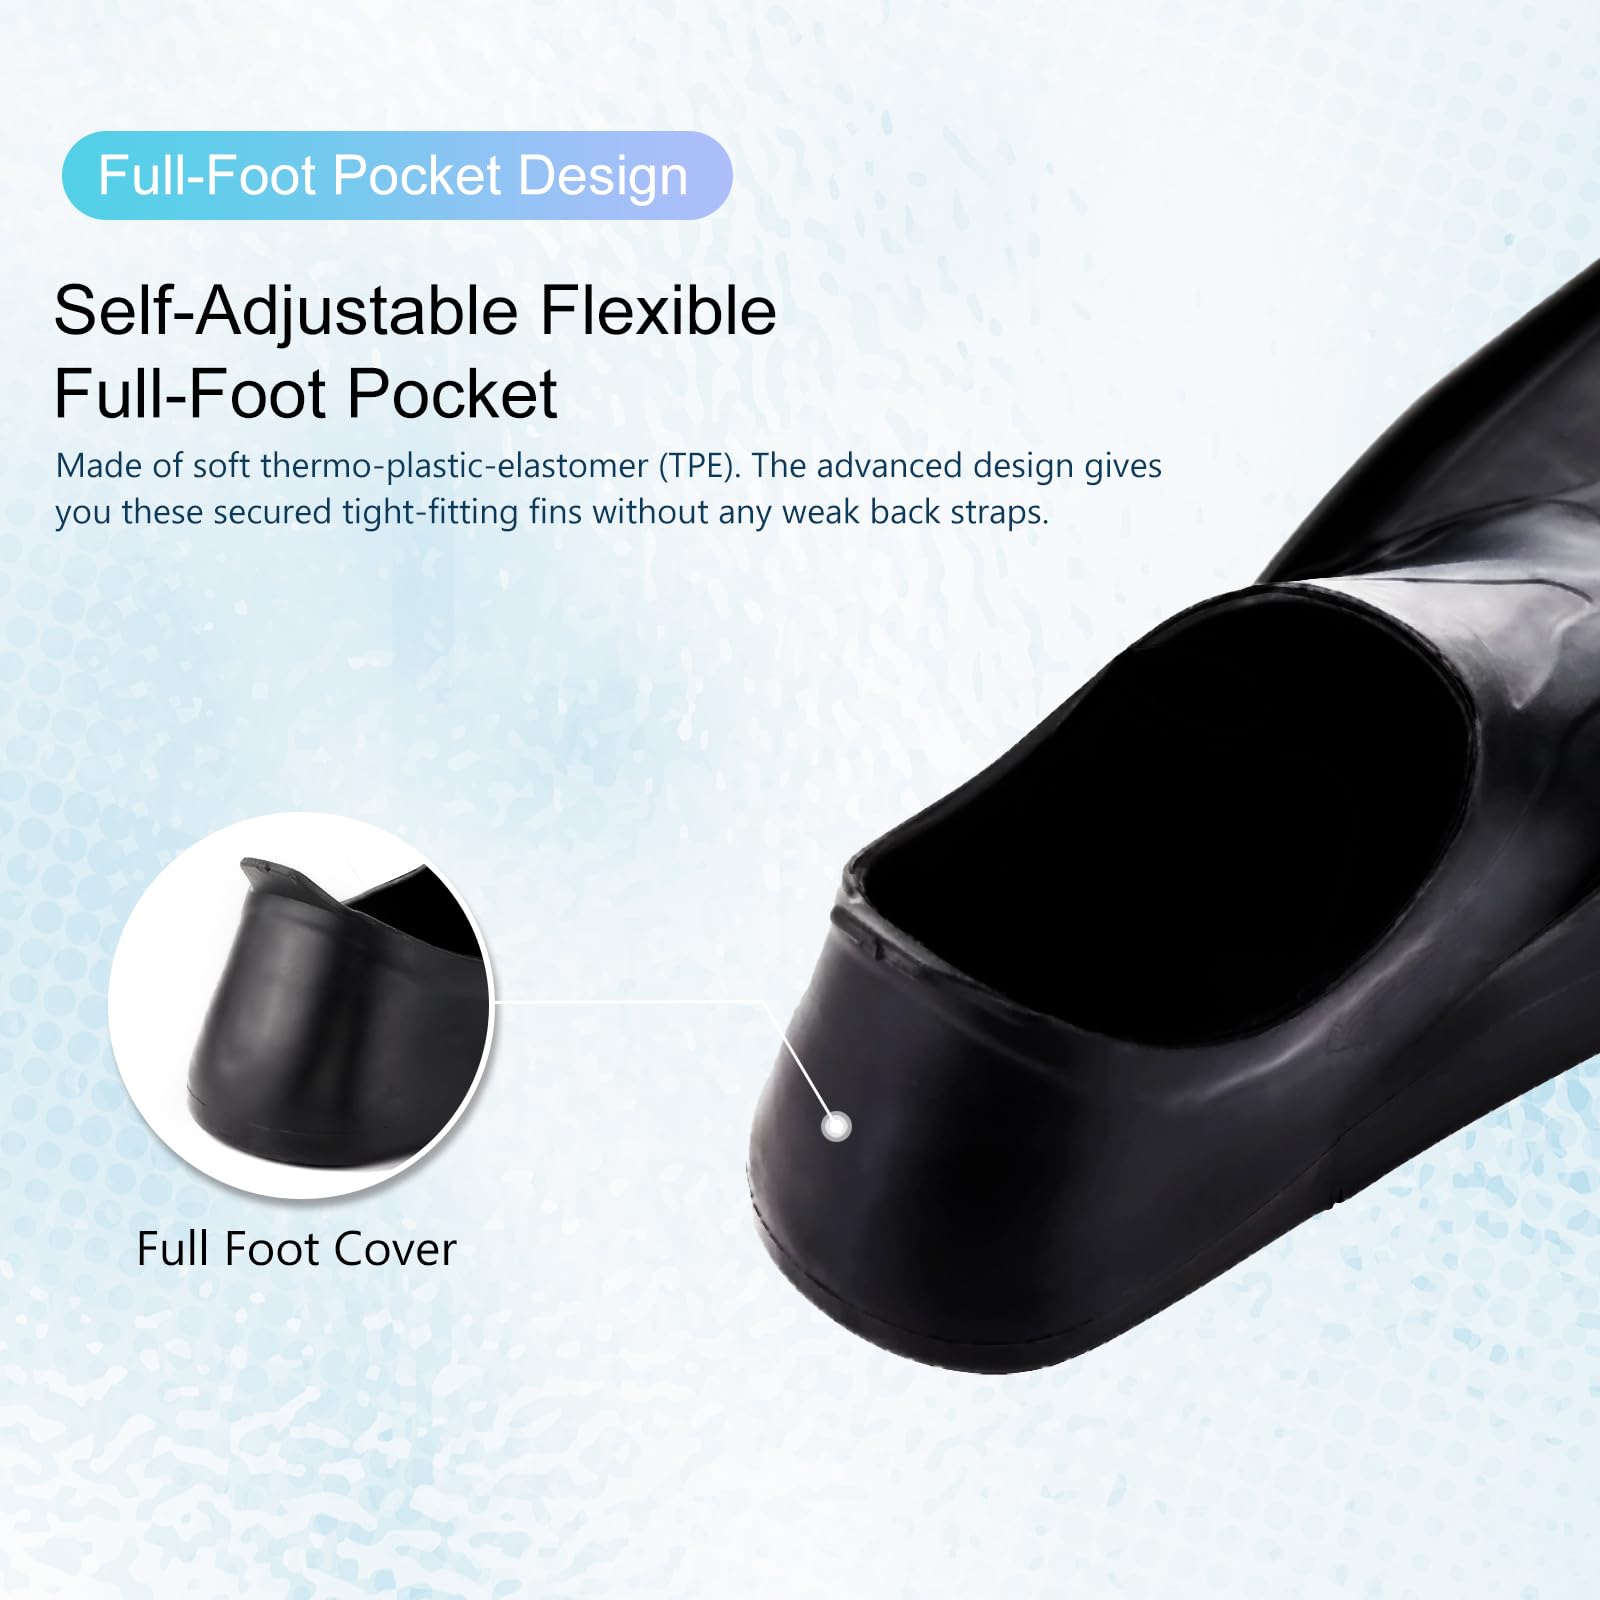 LUXPARD Snorkel Fins, Comfortable Soft Full Foot Snorkeling Fins, Flippers for Snorkeling, Scuba Diving, and Freediving